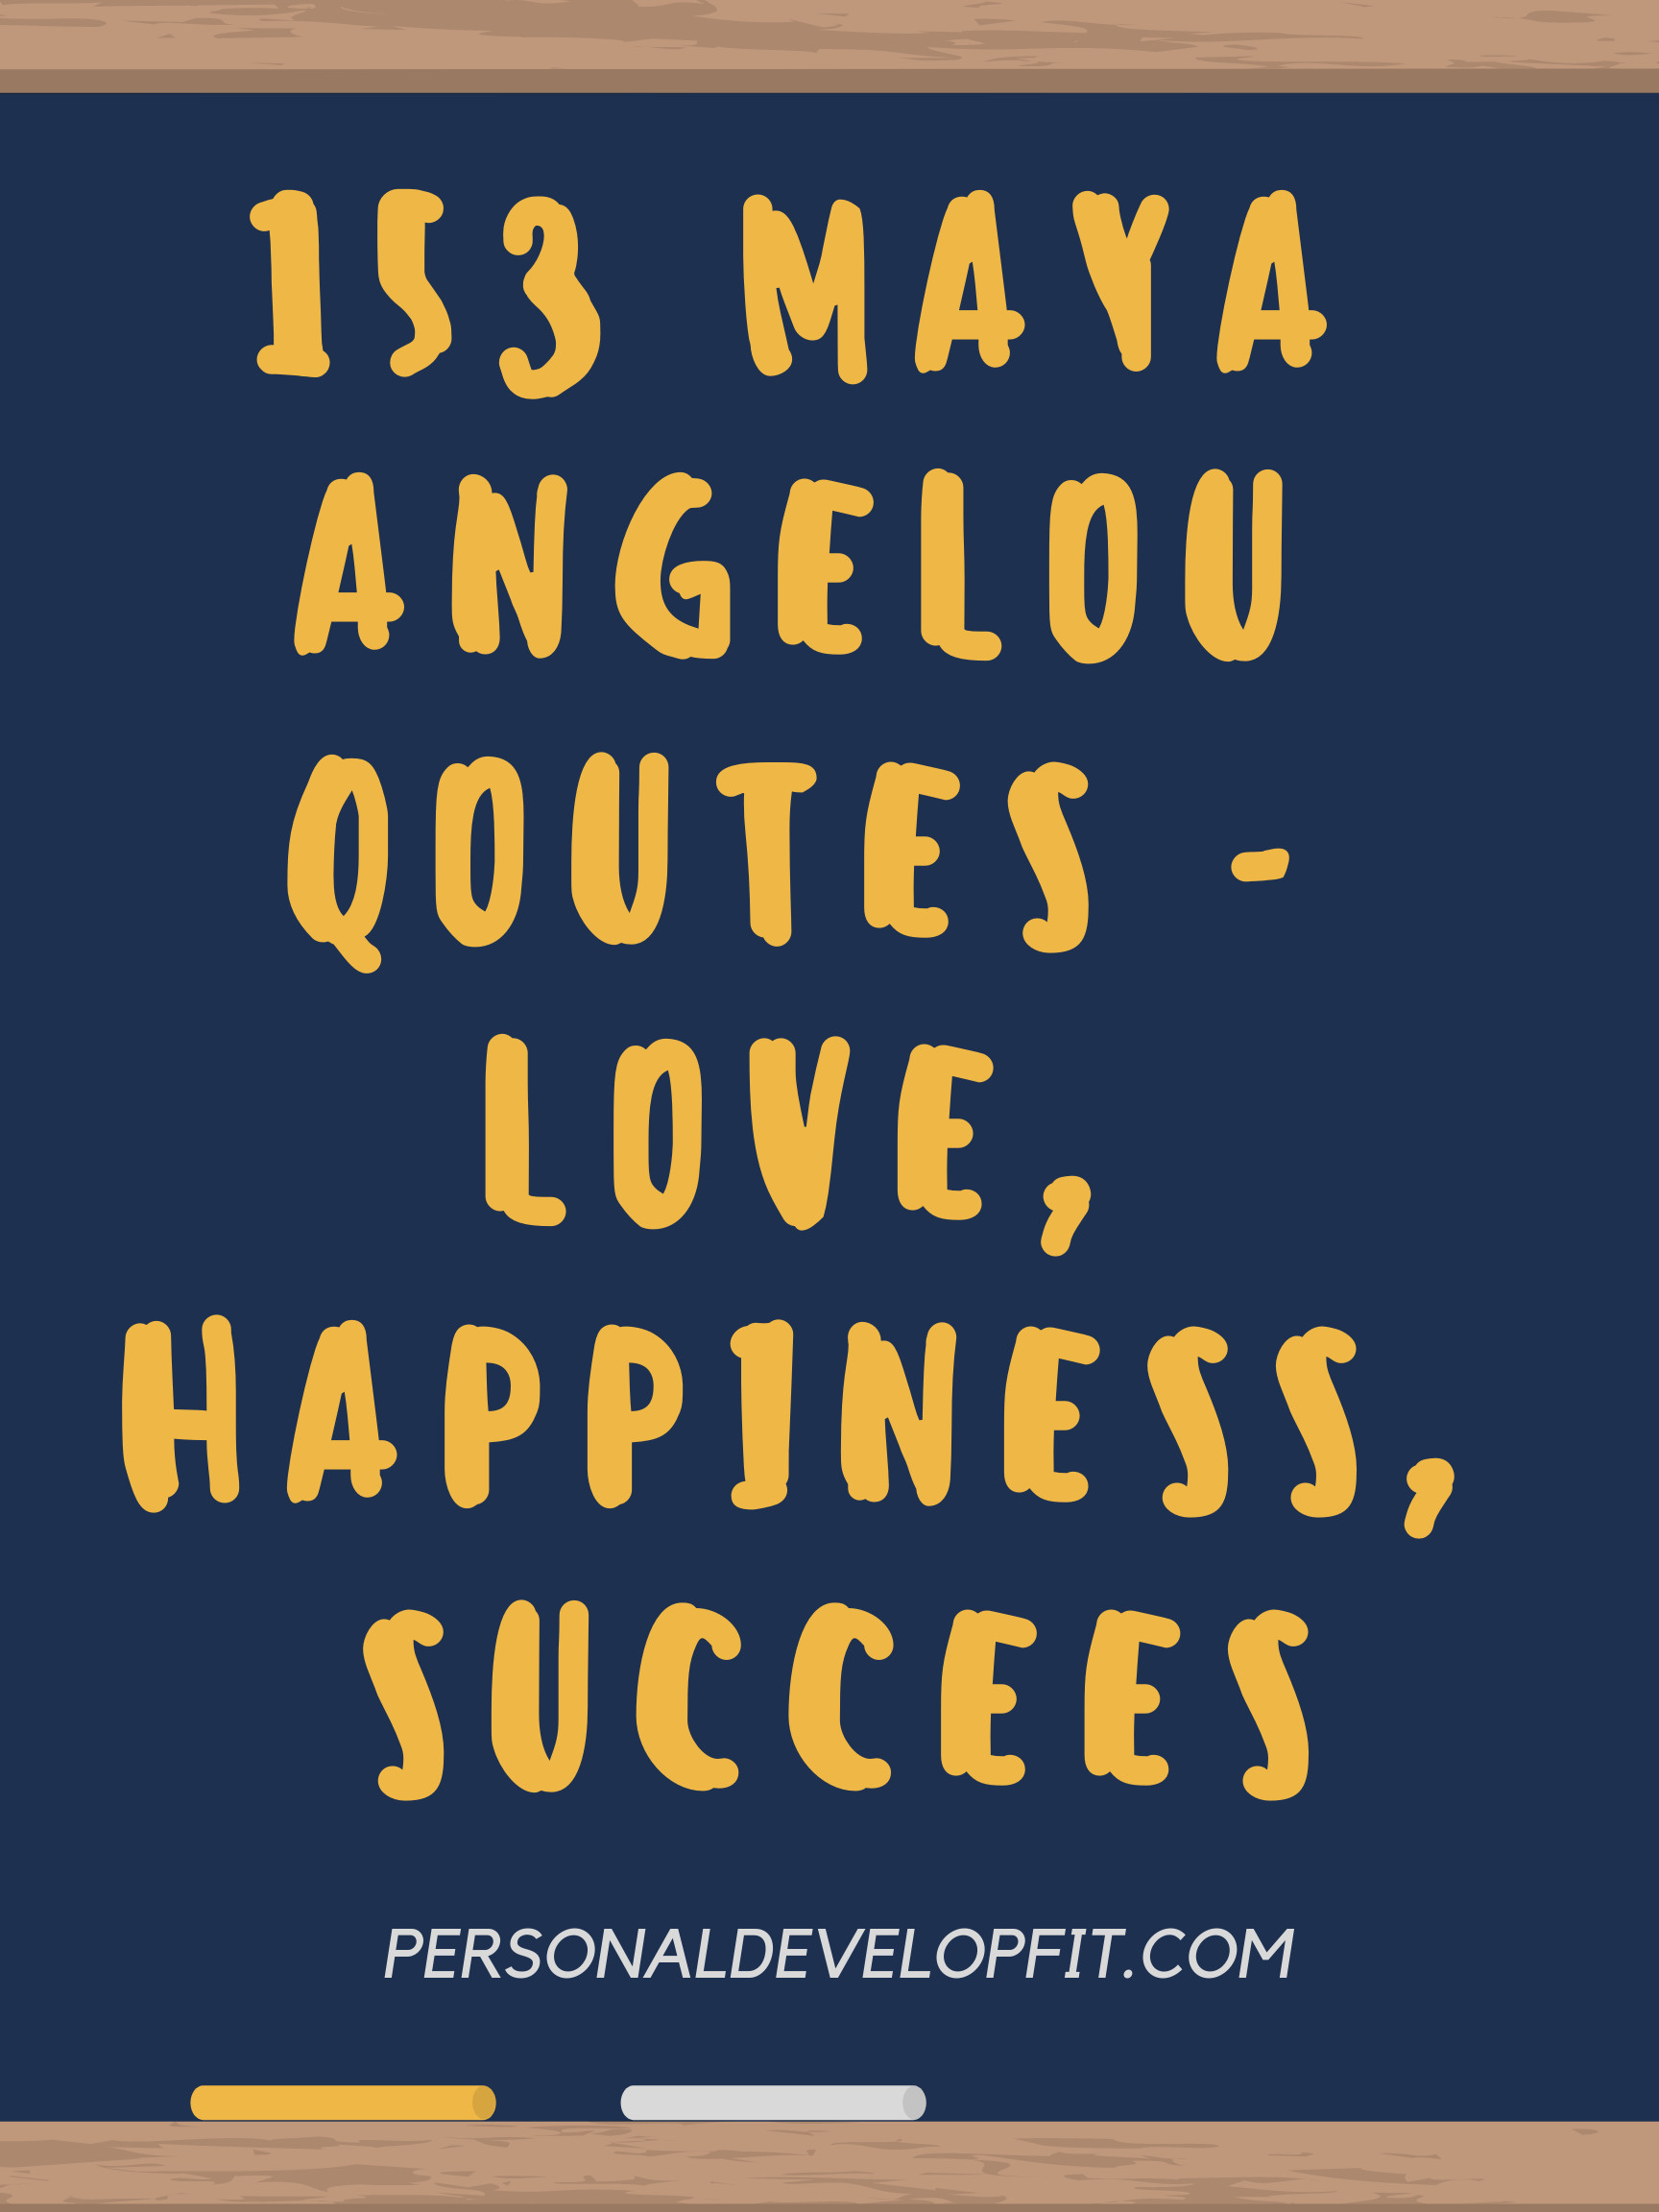 Relationship Happiness Quotes
 153 Maya Angelou Quotes on Love Happiness Family & Success